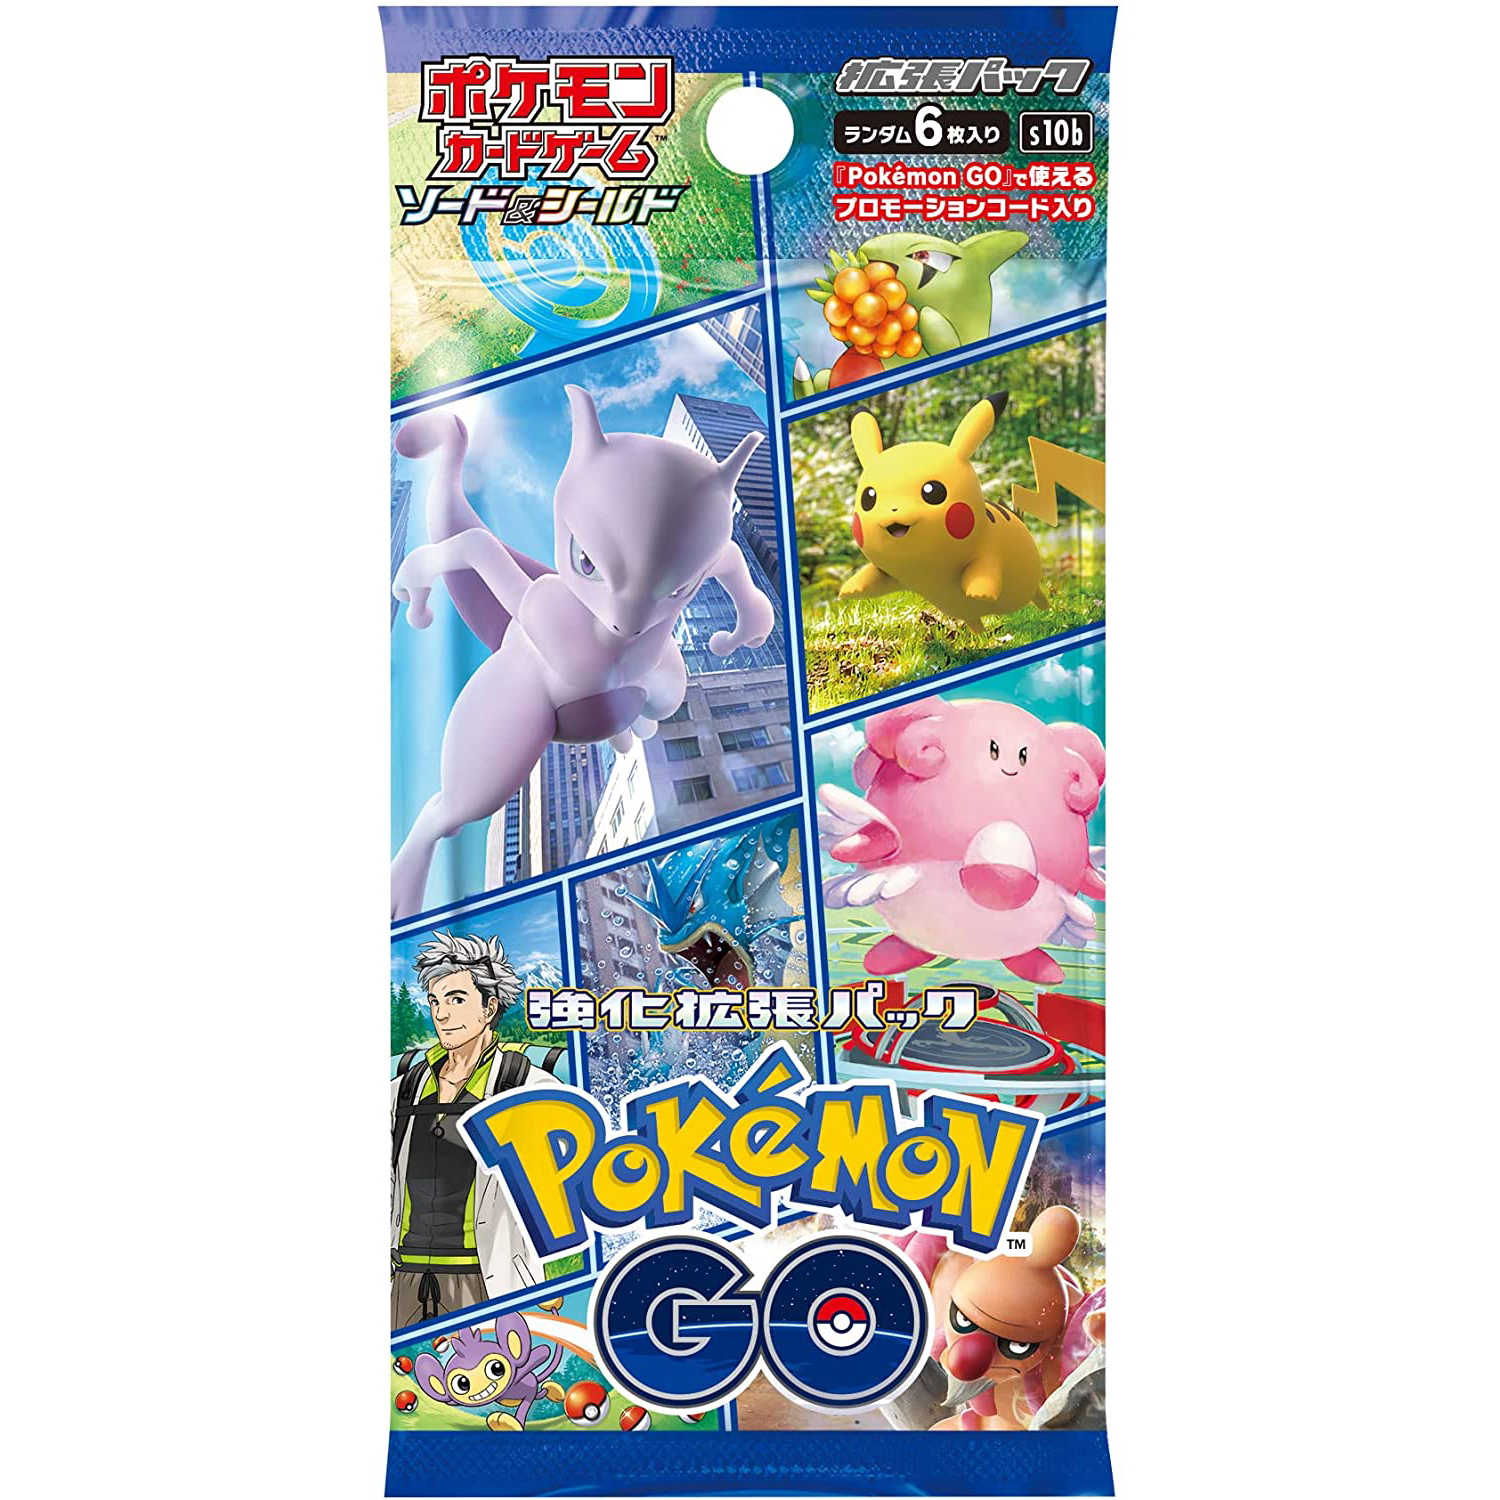 [s10b] POKÉMON CARD GAME Sword & Shield Expansion pack ｢Pokémon GO｣ Box  Release date: June 17 2022  1 box / 20 pack  1 pack / 6 cards